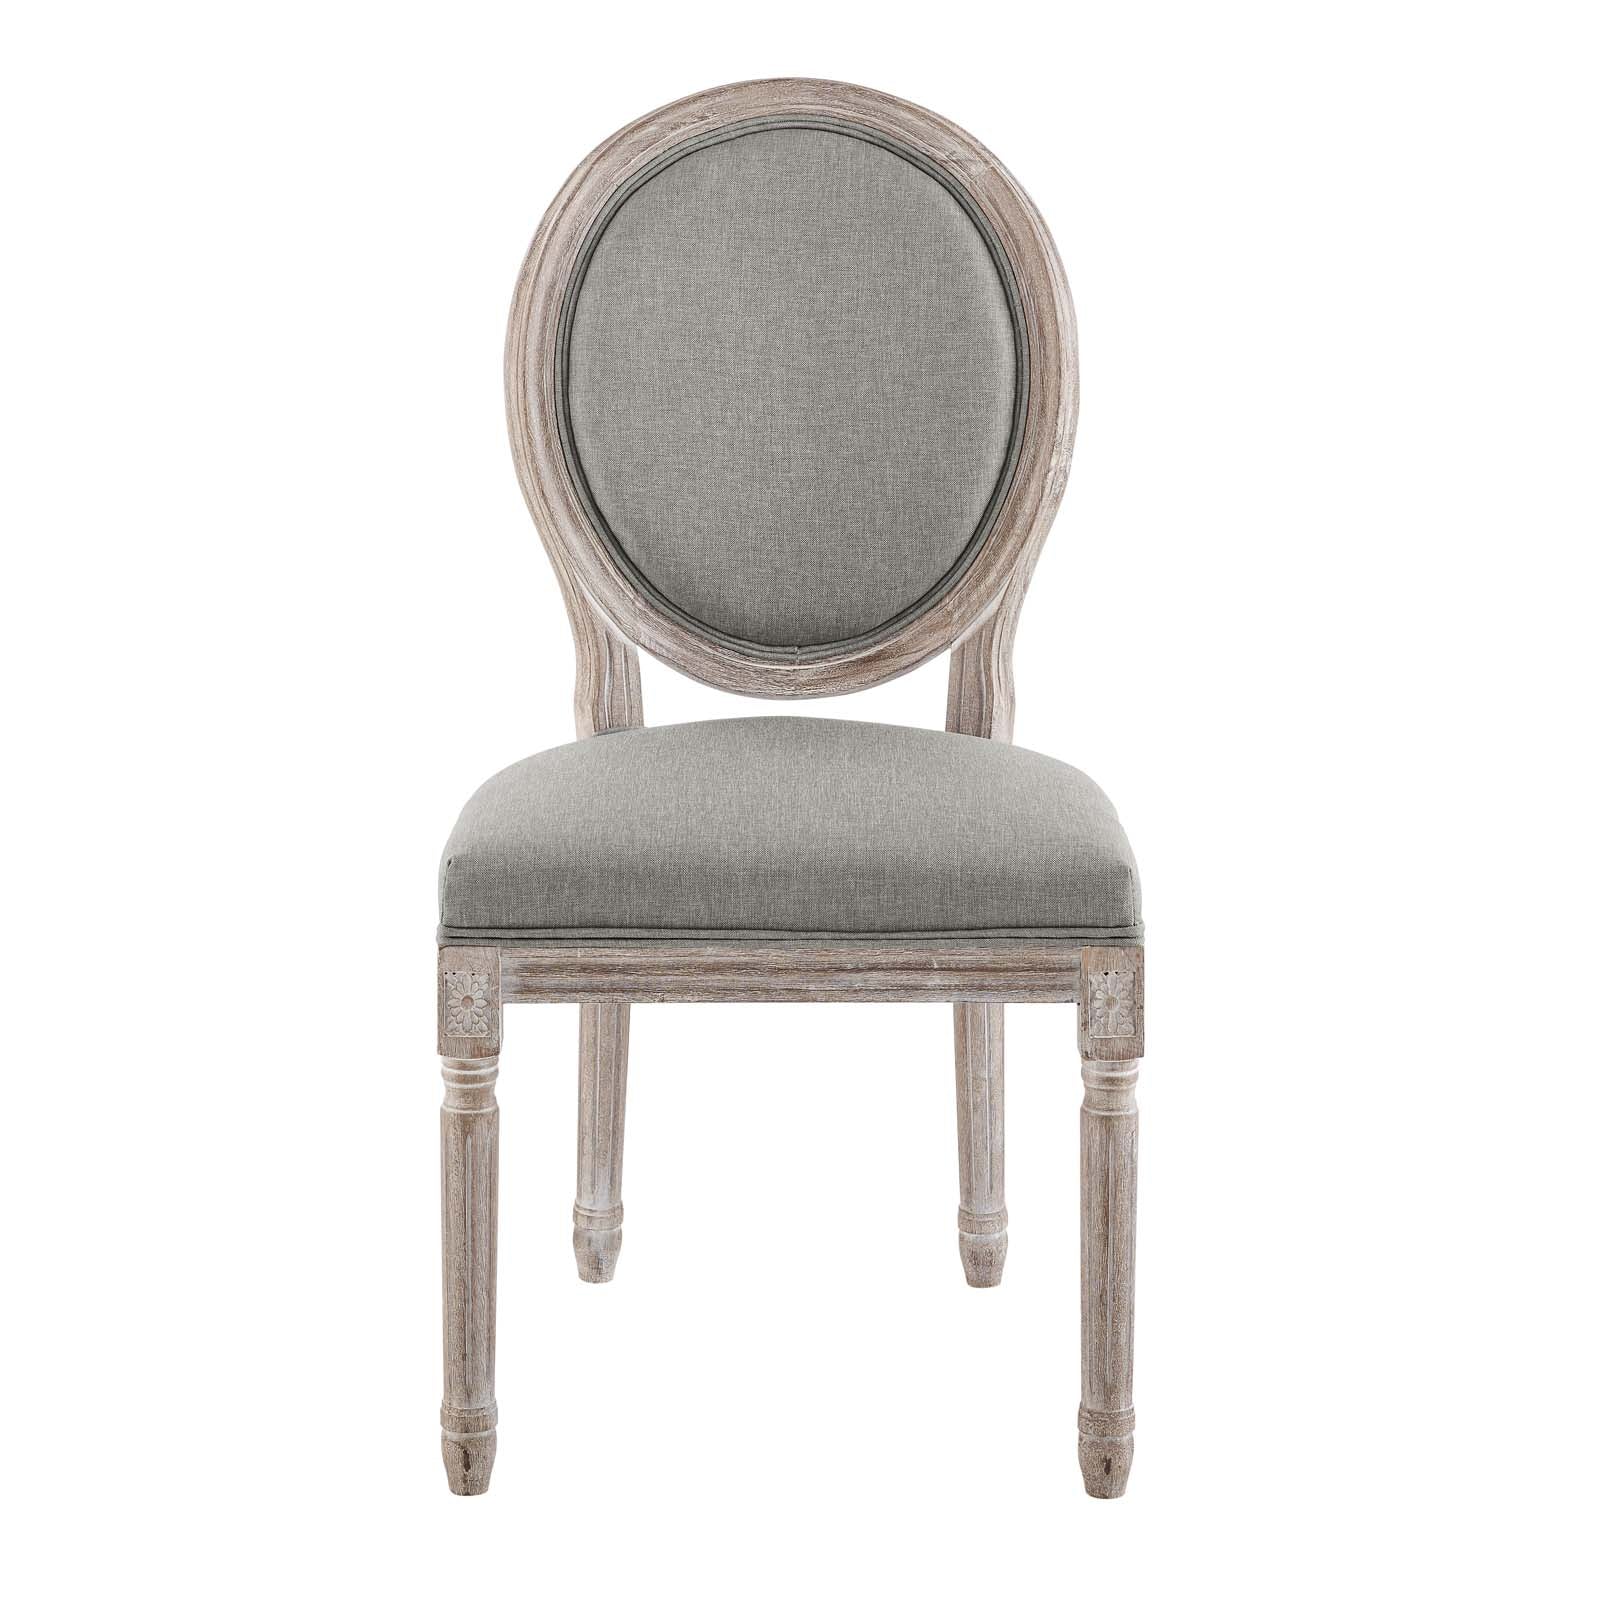 Emanate Dining Side Chair Upholstered Fabric Set of 4-Dining Chair-Modway-Wall2Wall Furnishings